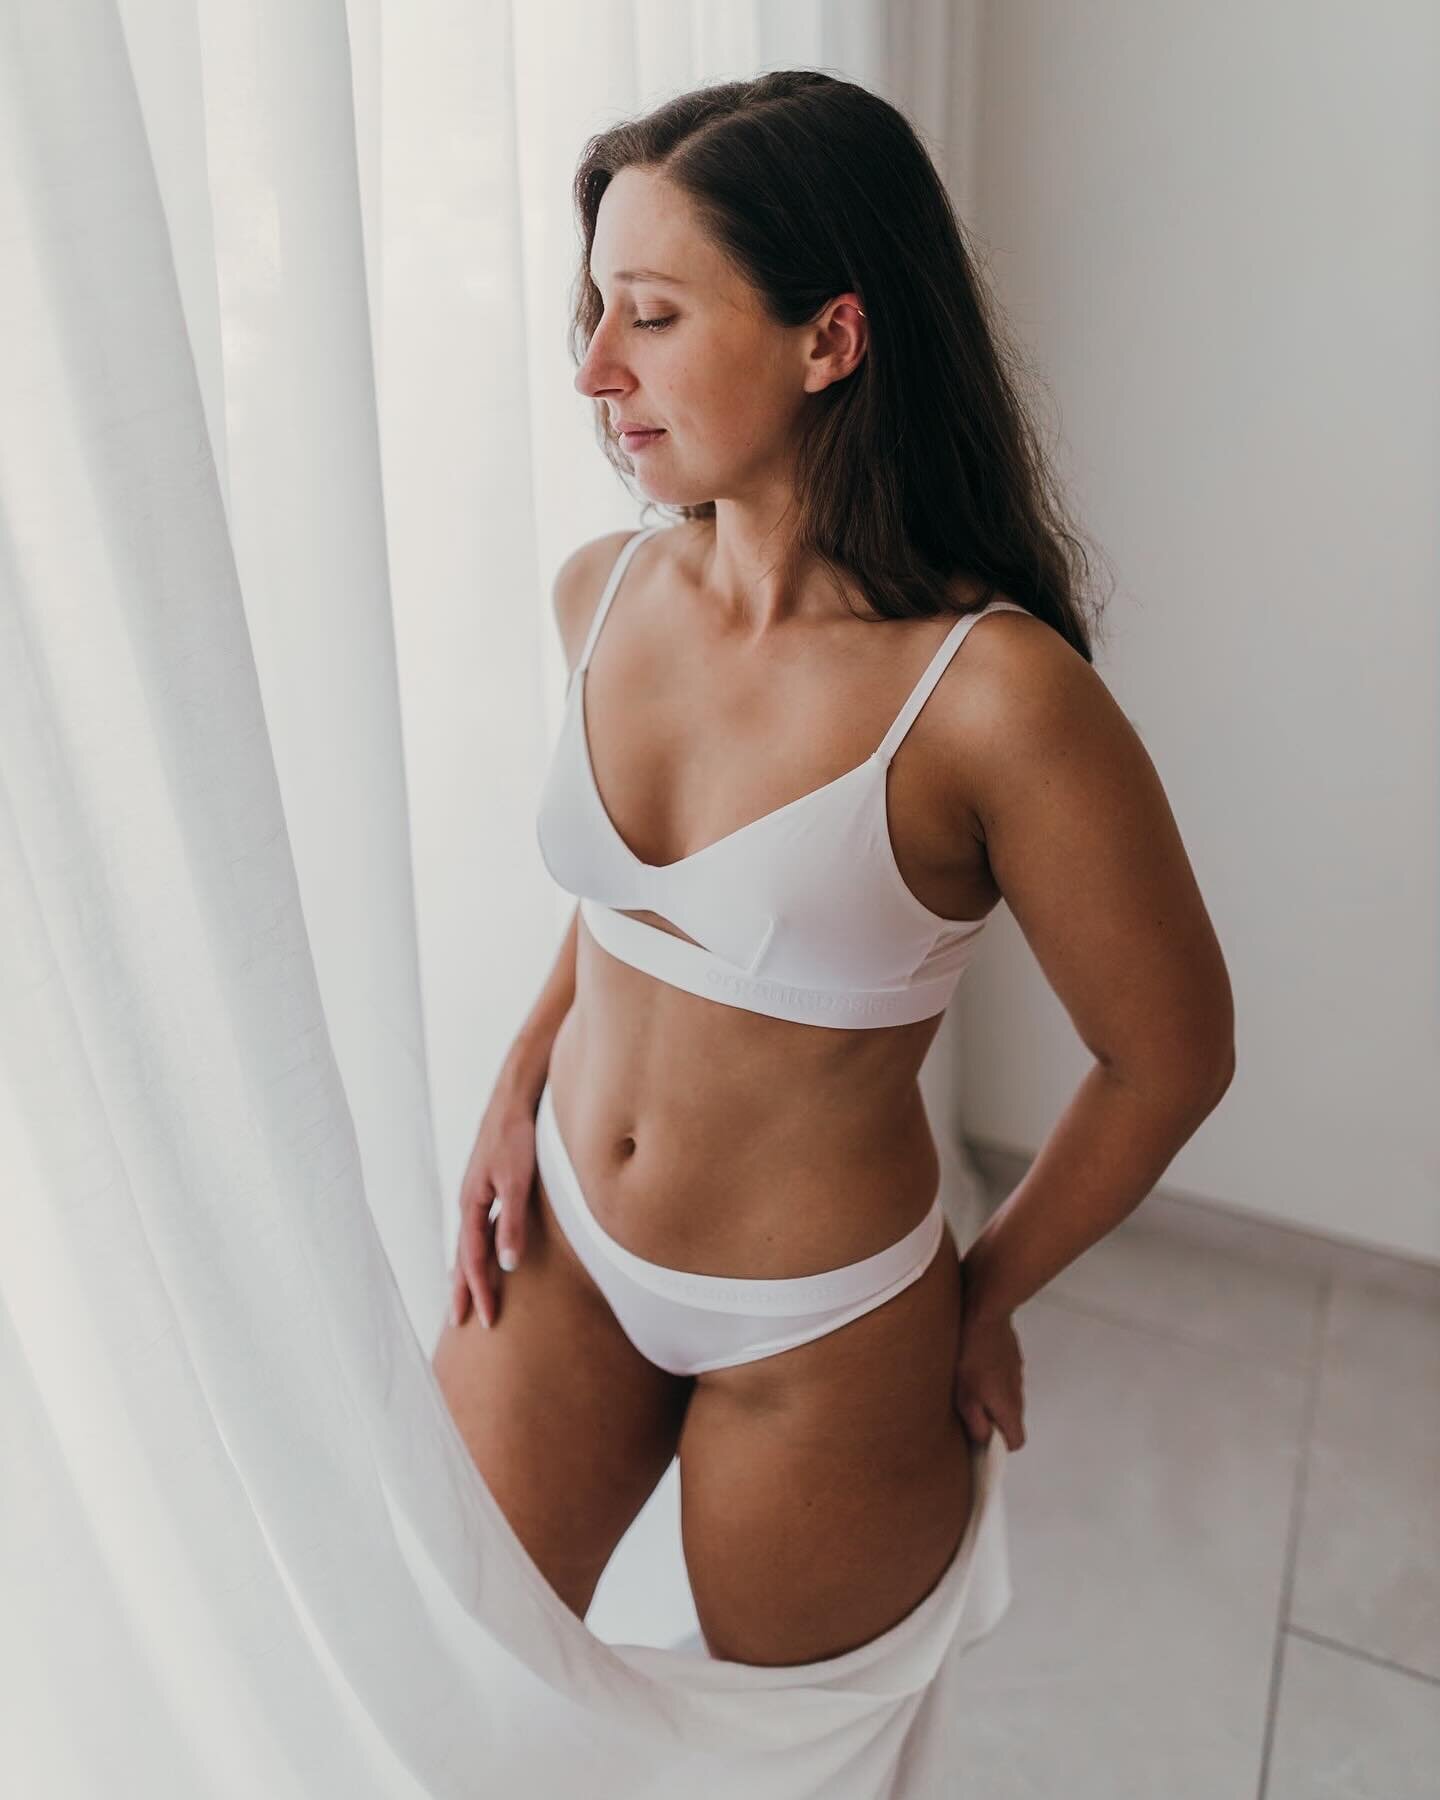 Super soft and comfortable underwear from @organicbasics. Perfect for travel, adventure and everyday life 😍

#organicbasics #humansoforganicbasics #ad #organicbasicsunderwear #ootd #organicbasicsdiscountcode #organicbasicsdiscount #sustainablefashio